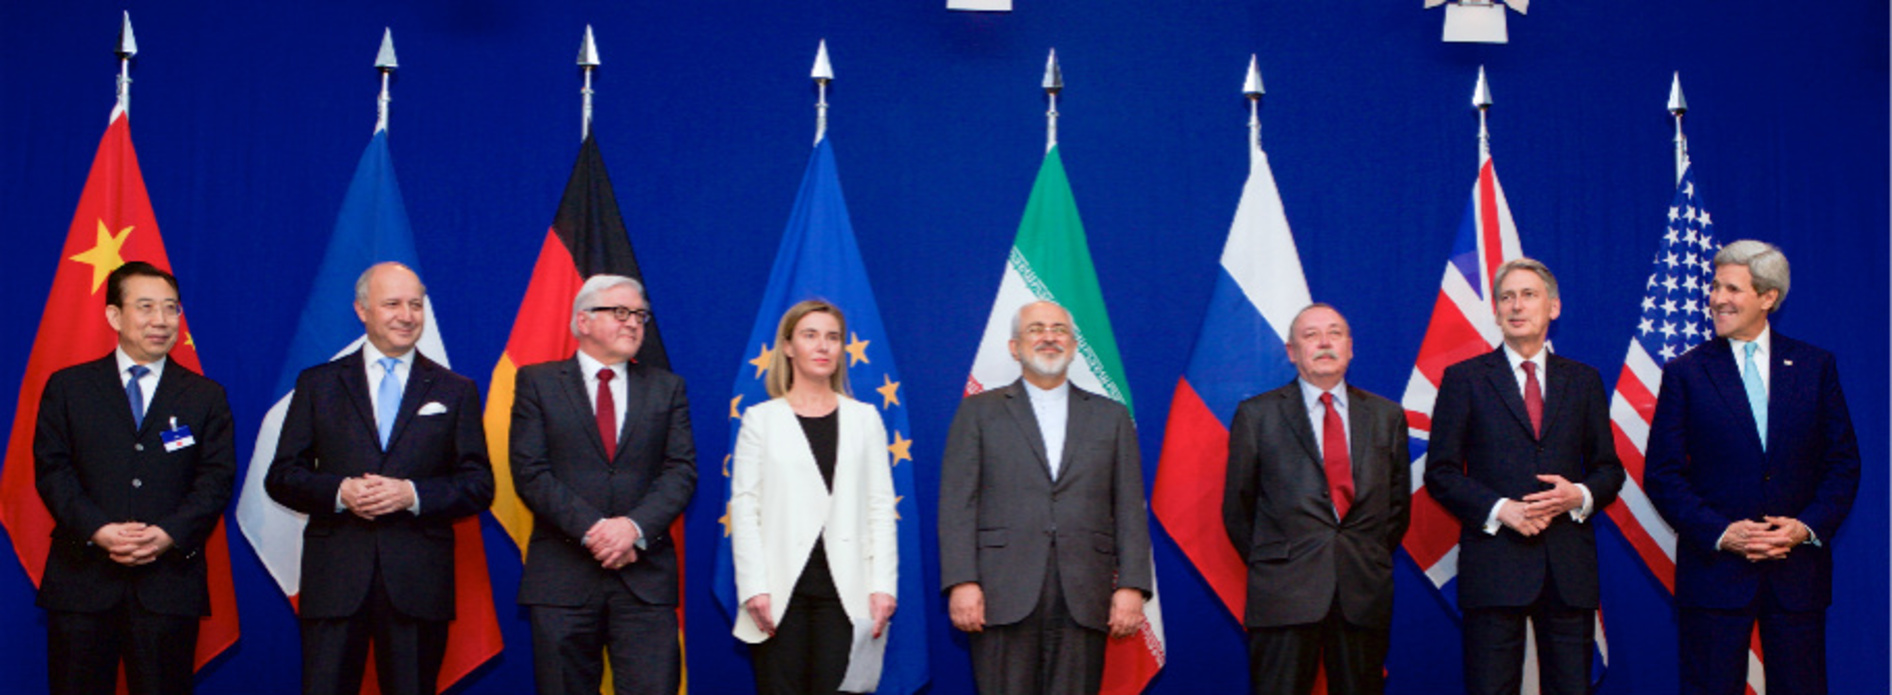 Everything You Need To Know About The Iranian Nuclear Deal